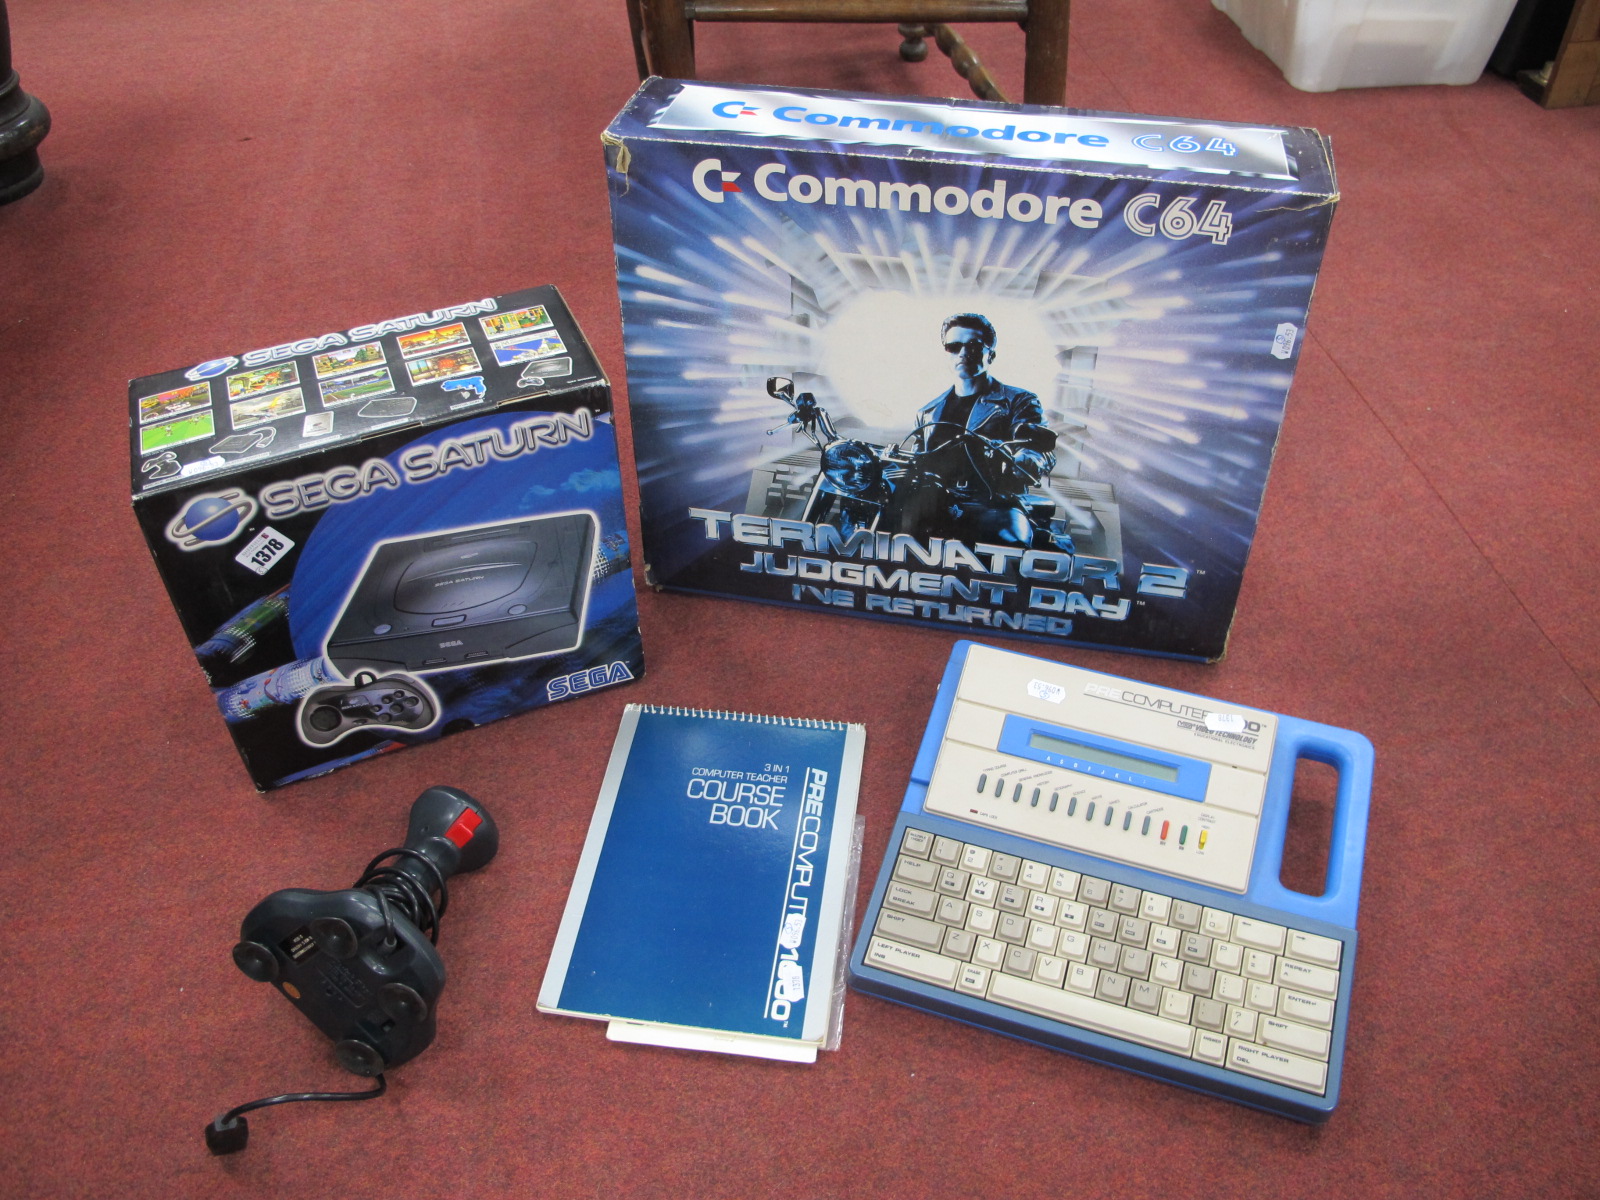 Vintage Computing Commodore 64, Sega Saturn, and pre computer 1000, along with associated joystick.